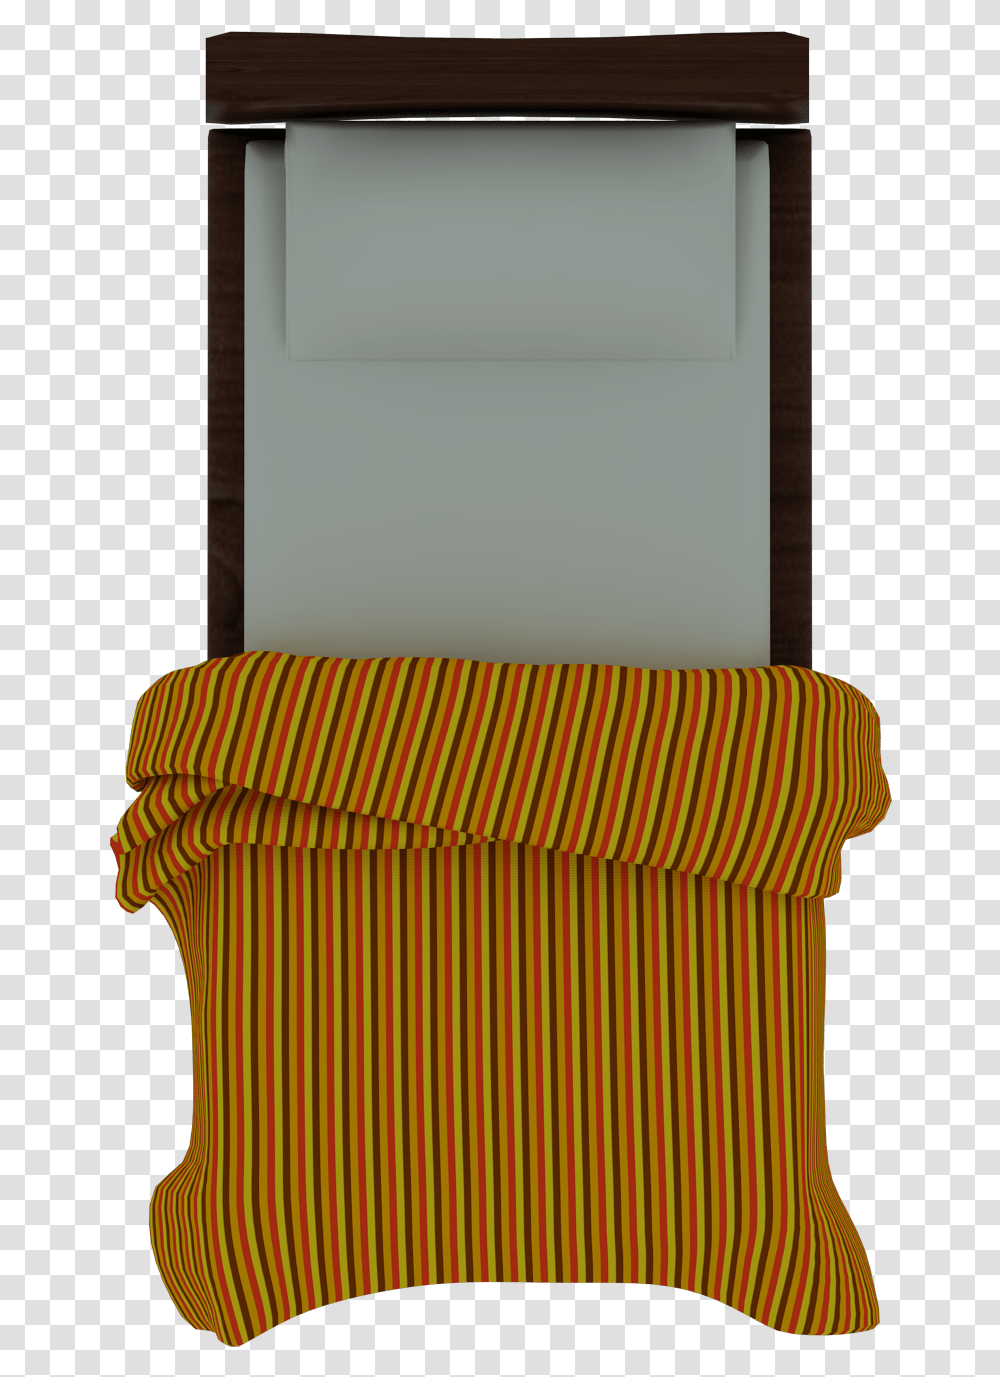 Folding Chair Download Folding Chair, Couch, Furniture, Home Decor, Cushion Transparent Png